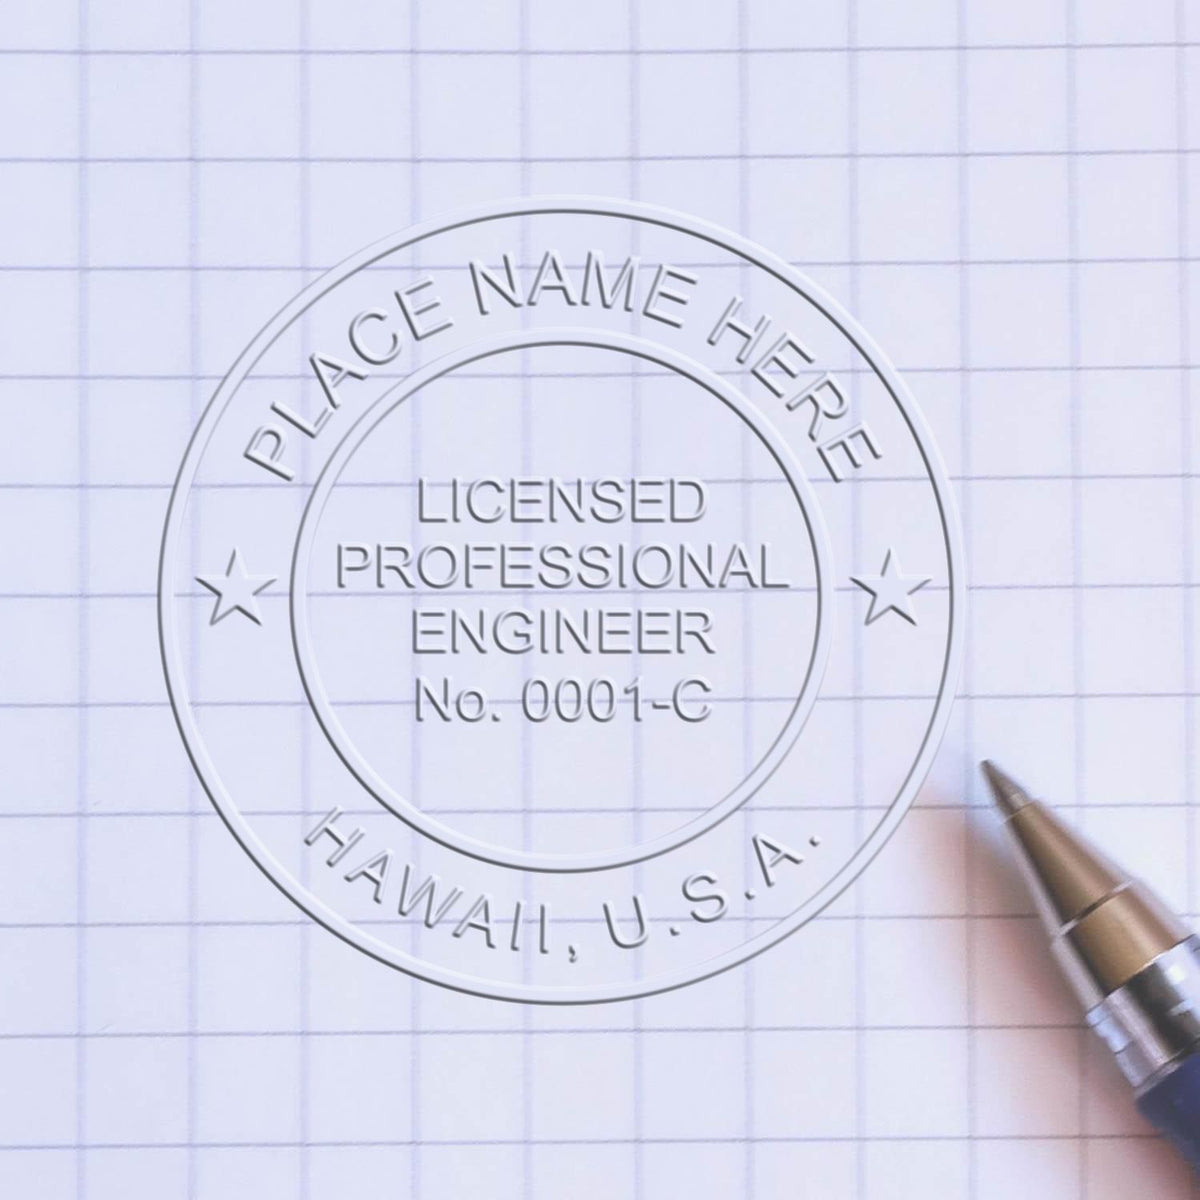 A stamped impression of the Hawaii Engineer Desk Seal in this stylish lifestyle photo, setting the tone for a unique and personalized product.